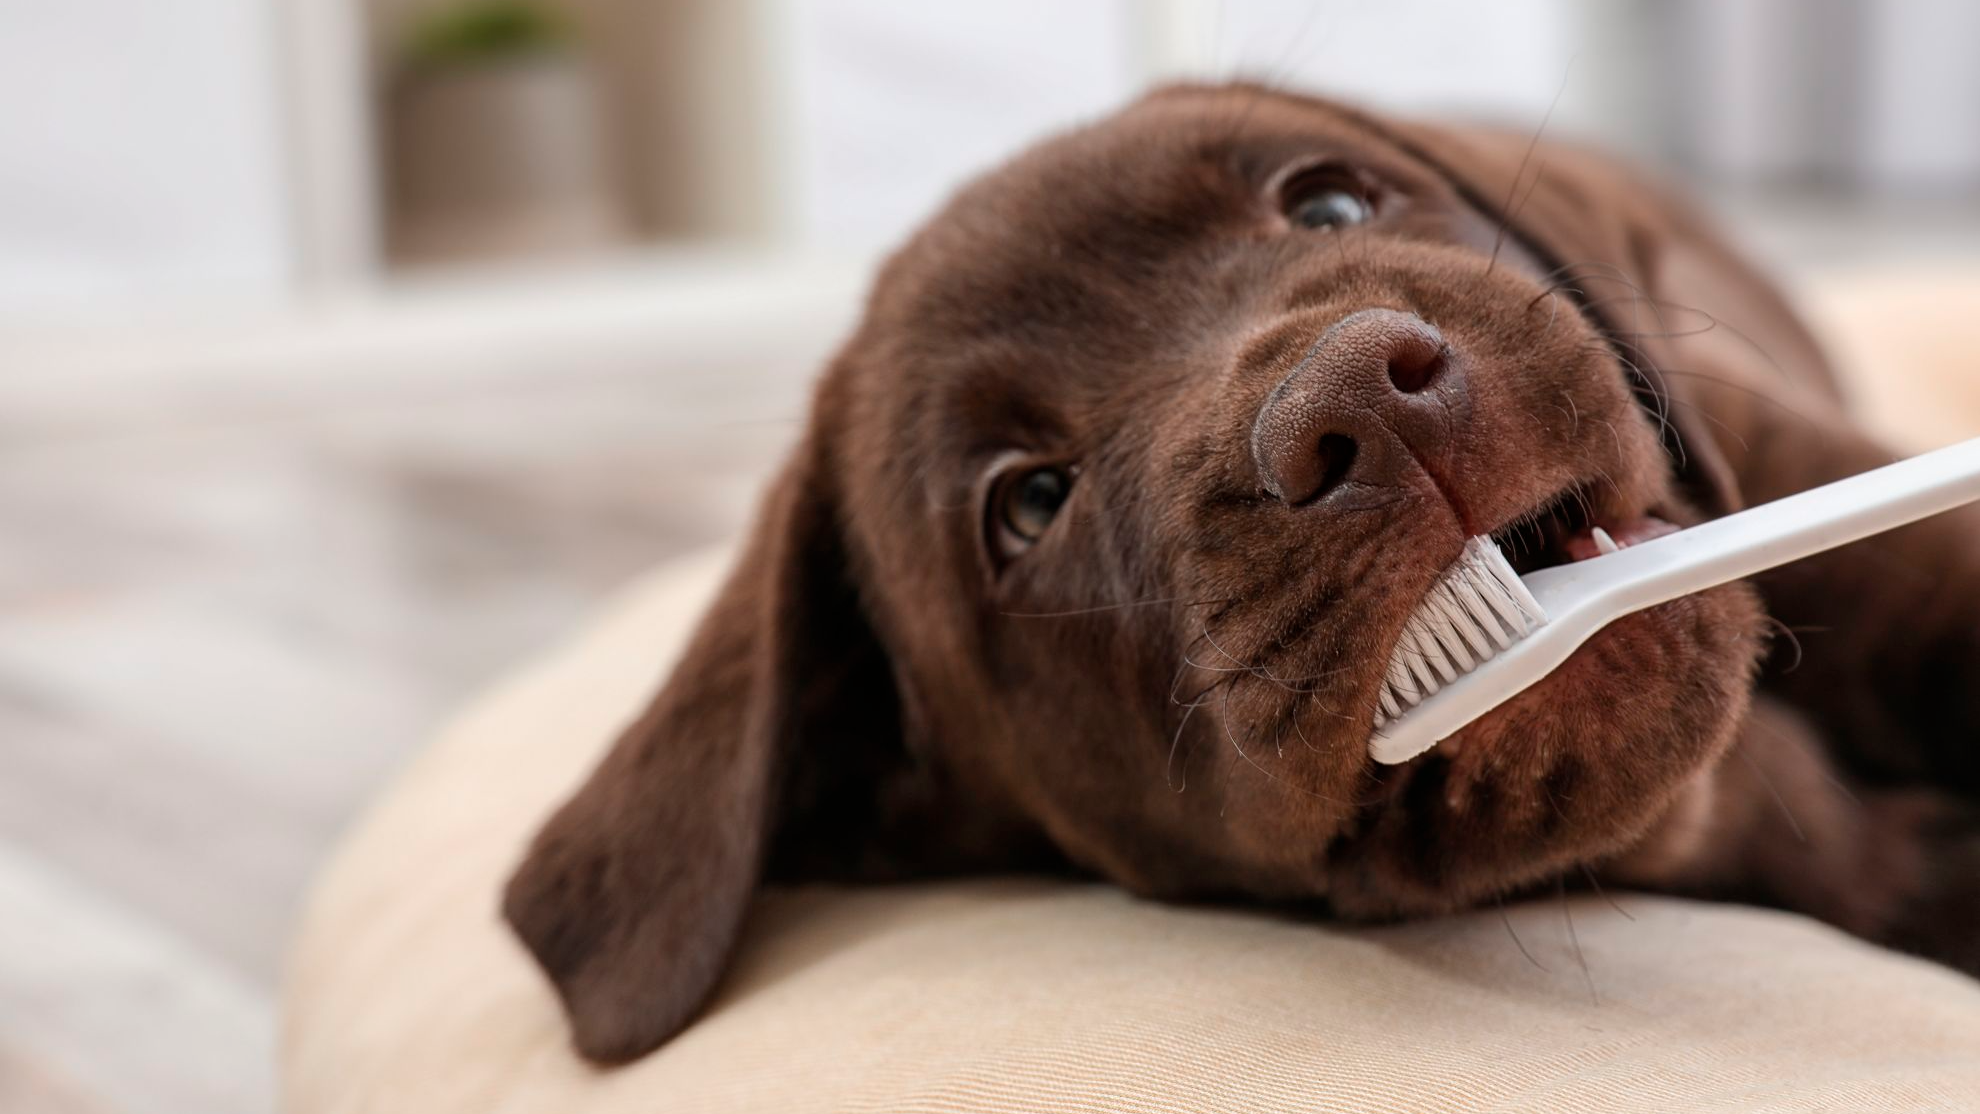 Labrador Retriever with toothbrush in mouth